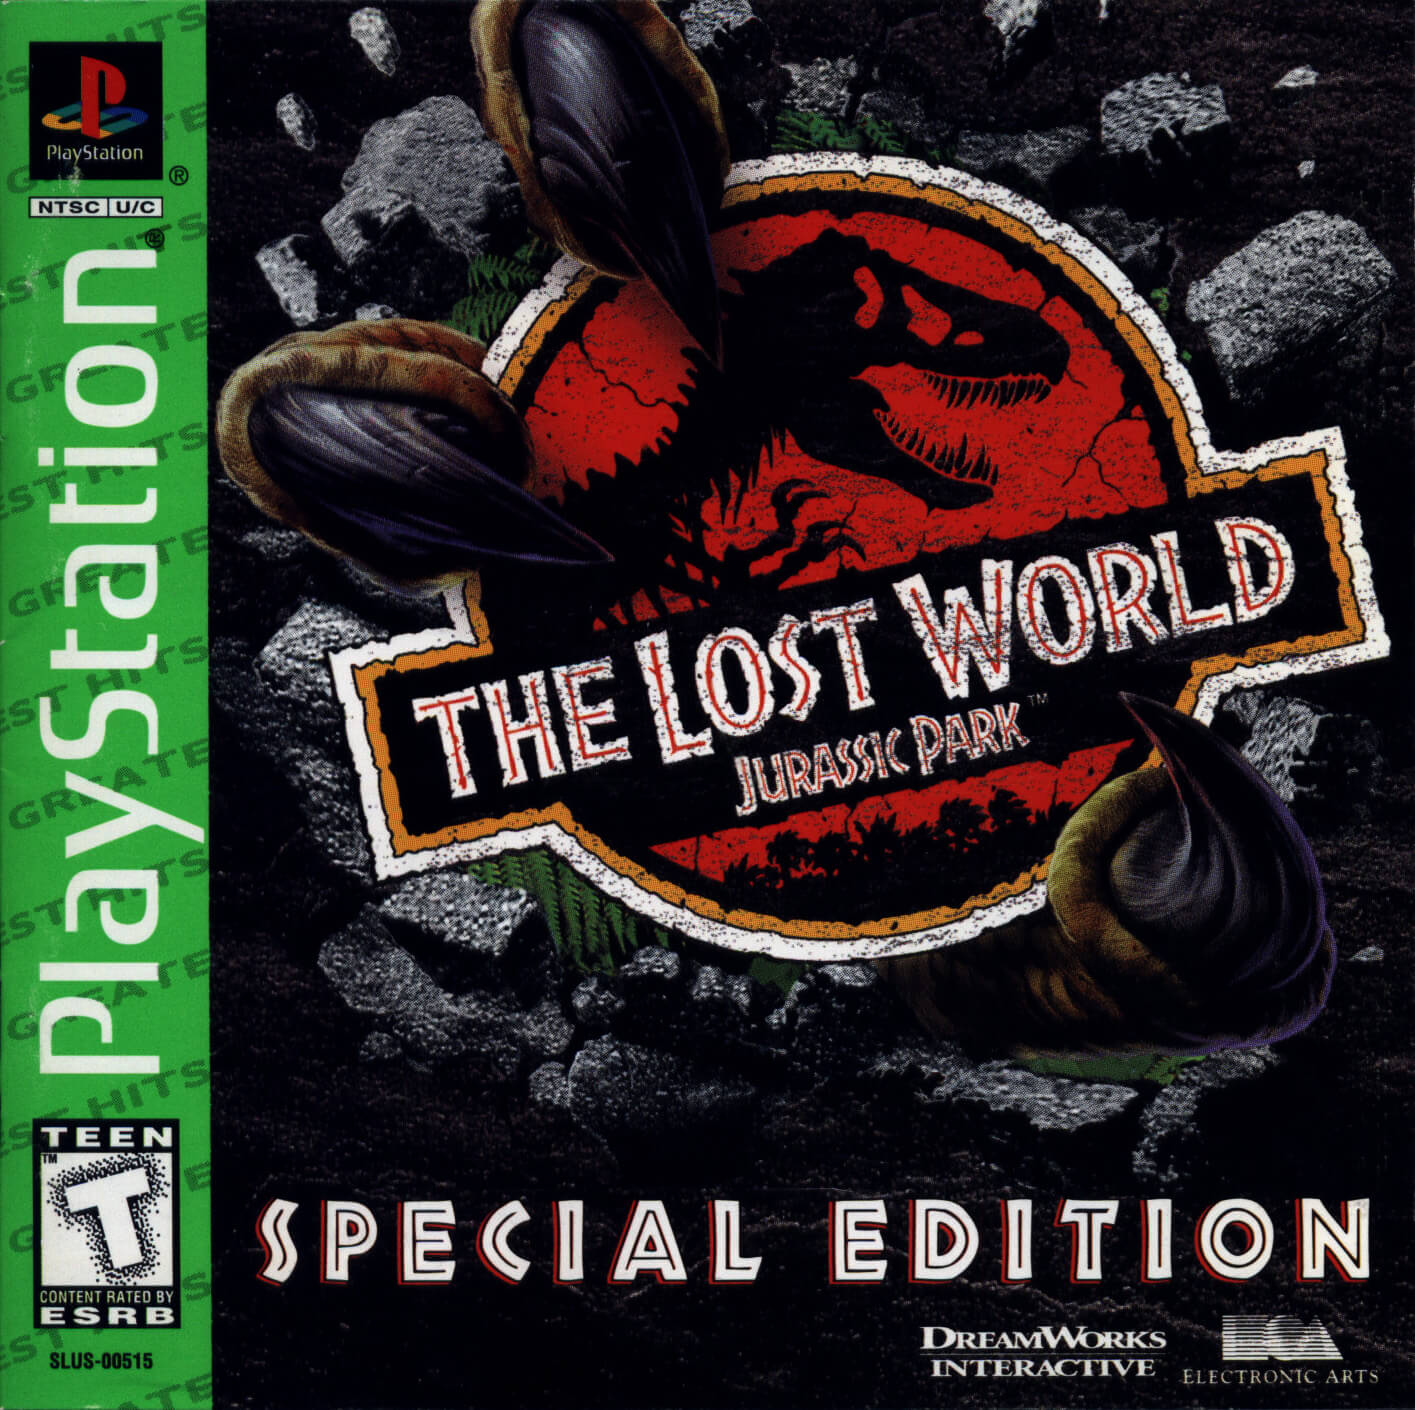 The Lost World: Jurassic Park: Special Edition